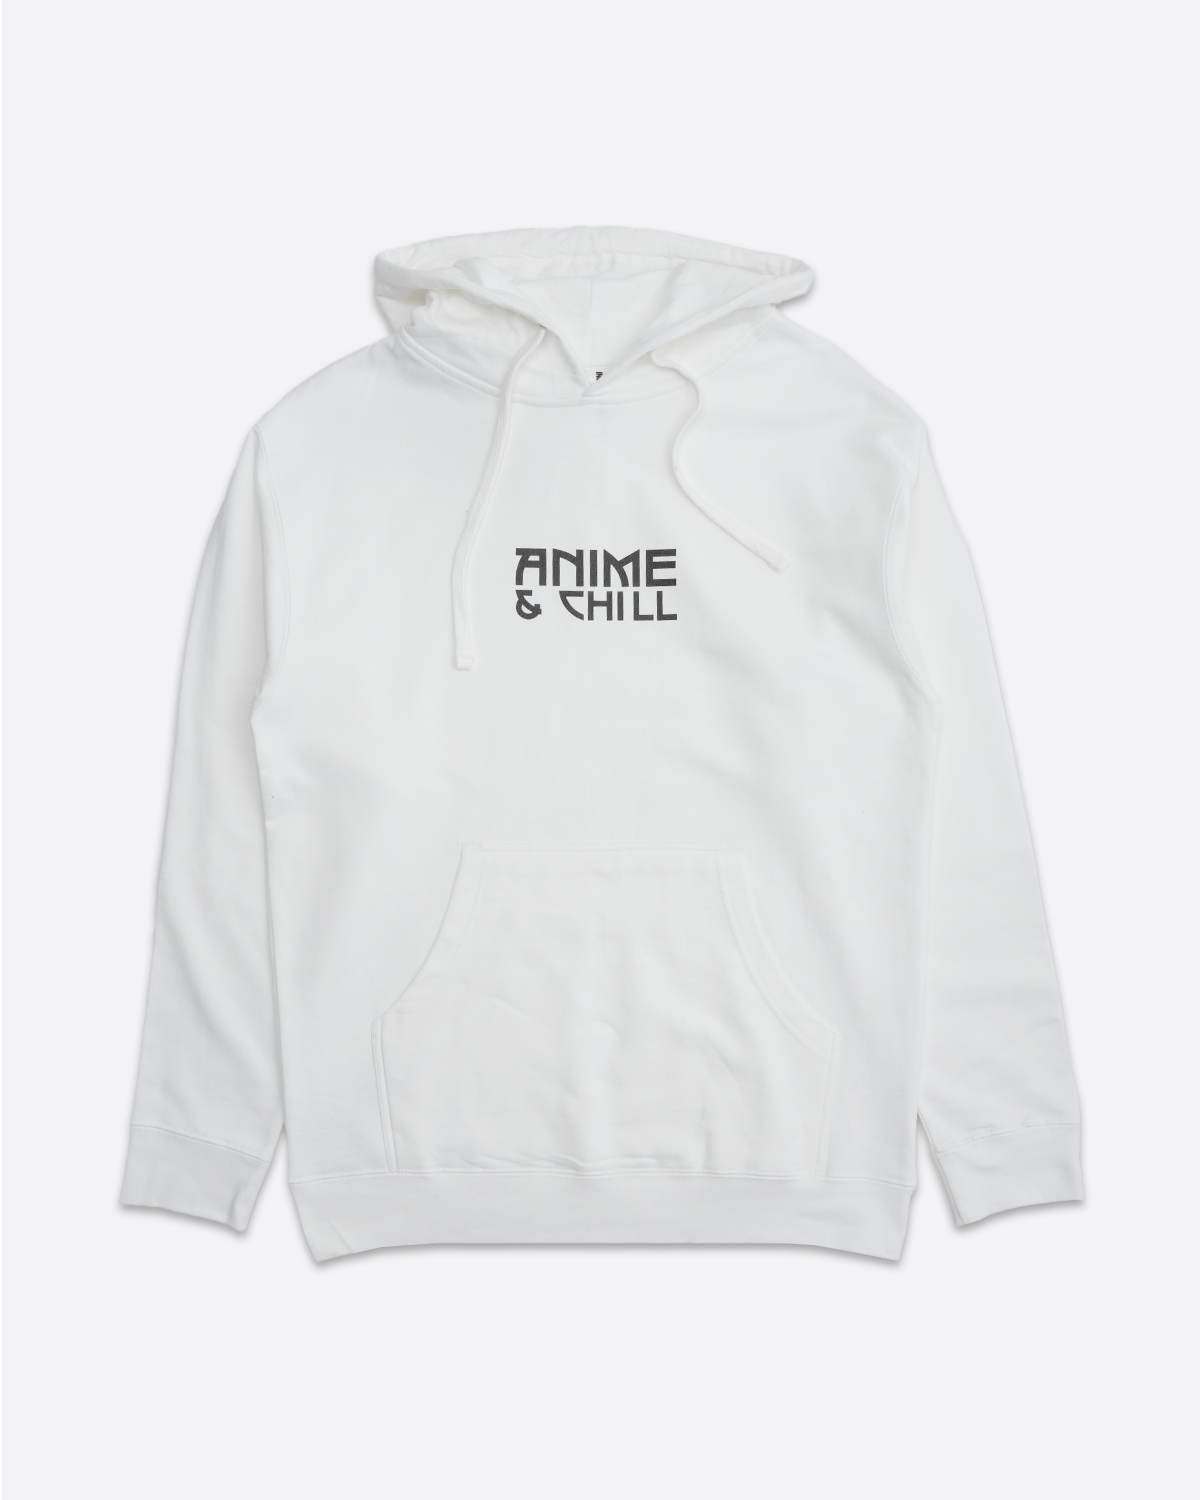 Anime & Chill Hoodie